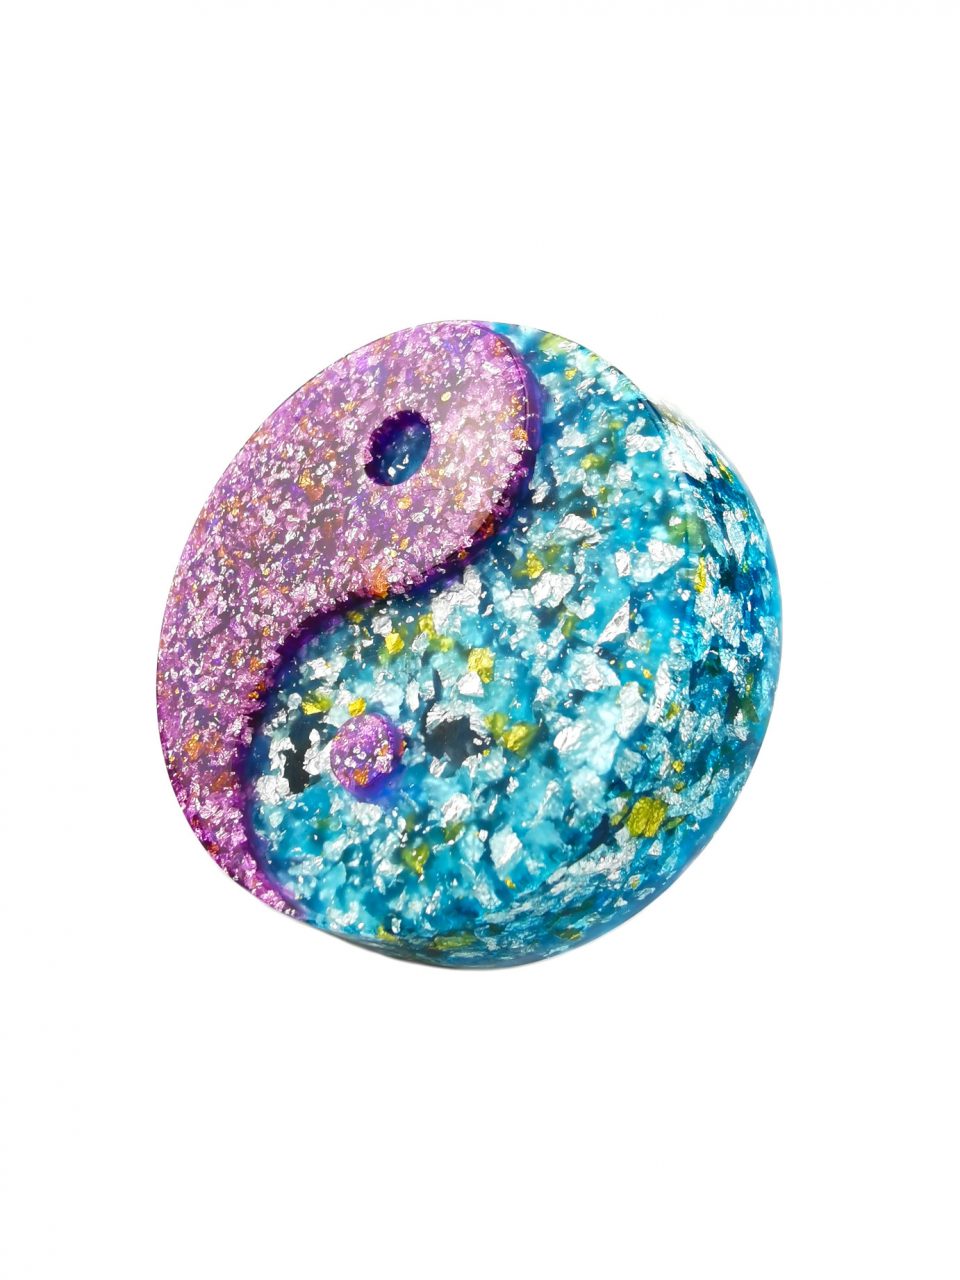 Yin Yang Orgone Puck in Blue Violet by OrgoneVibes